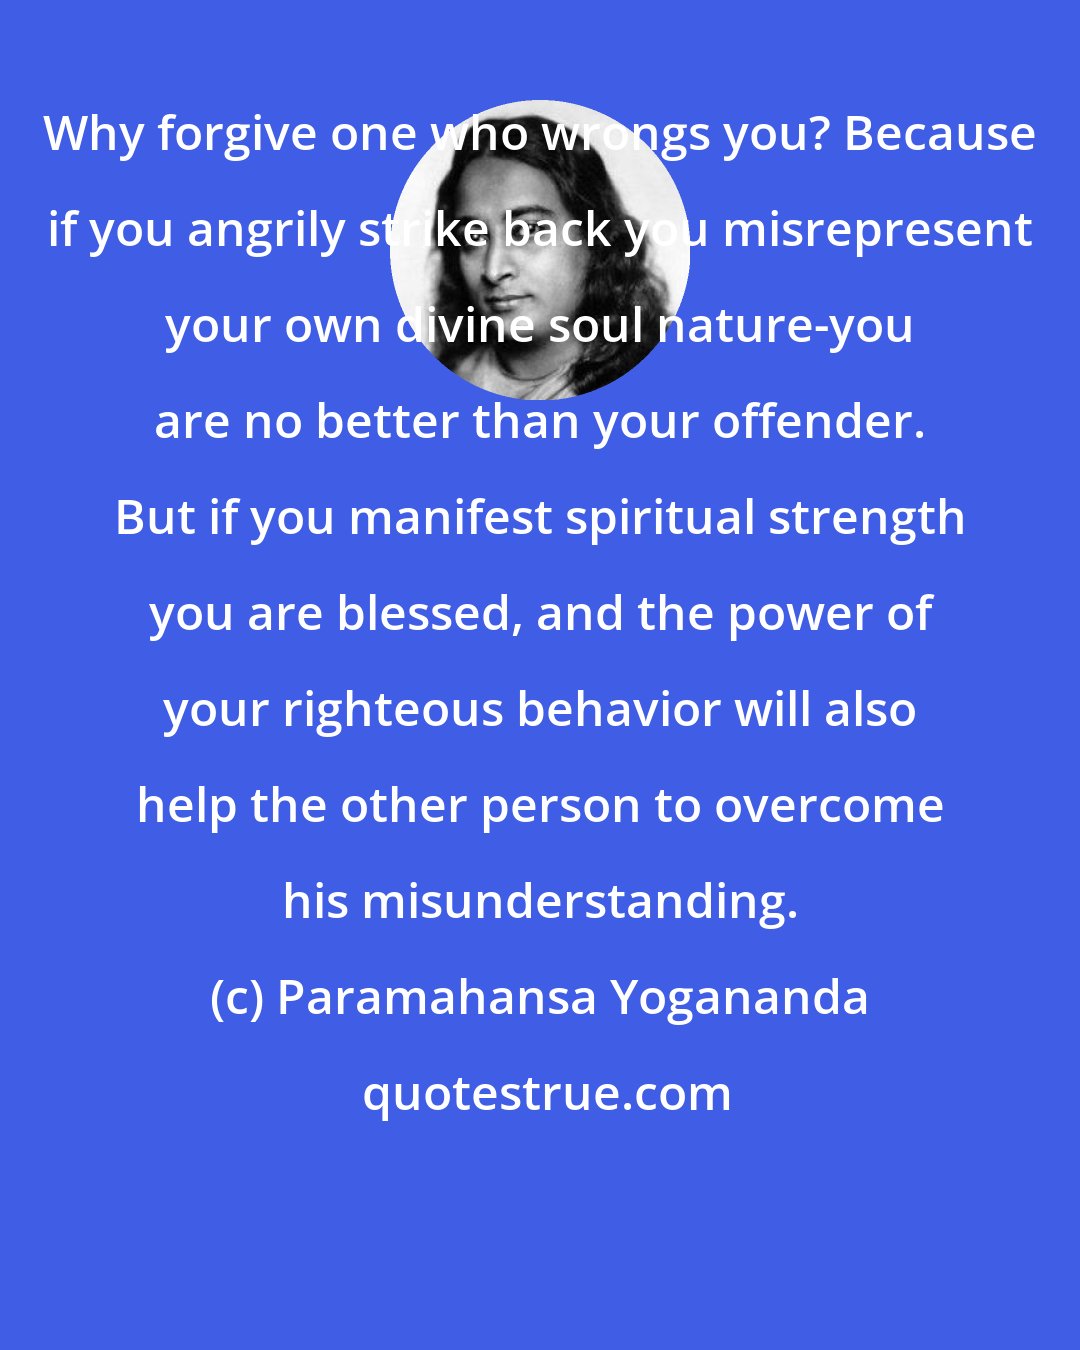 Paramahansa Yogananda: Why forgive one who wrongs you? Because if you angrily strike back you misrepresent your own divine soul nature-you are no better than your offender. But if you manifest spiritual strength you are blessed, and the power of your righteous behavior will also help the other person to overcome his misunderstanding.